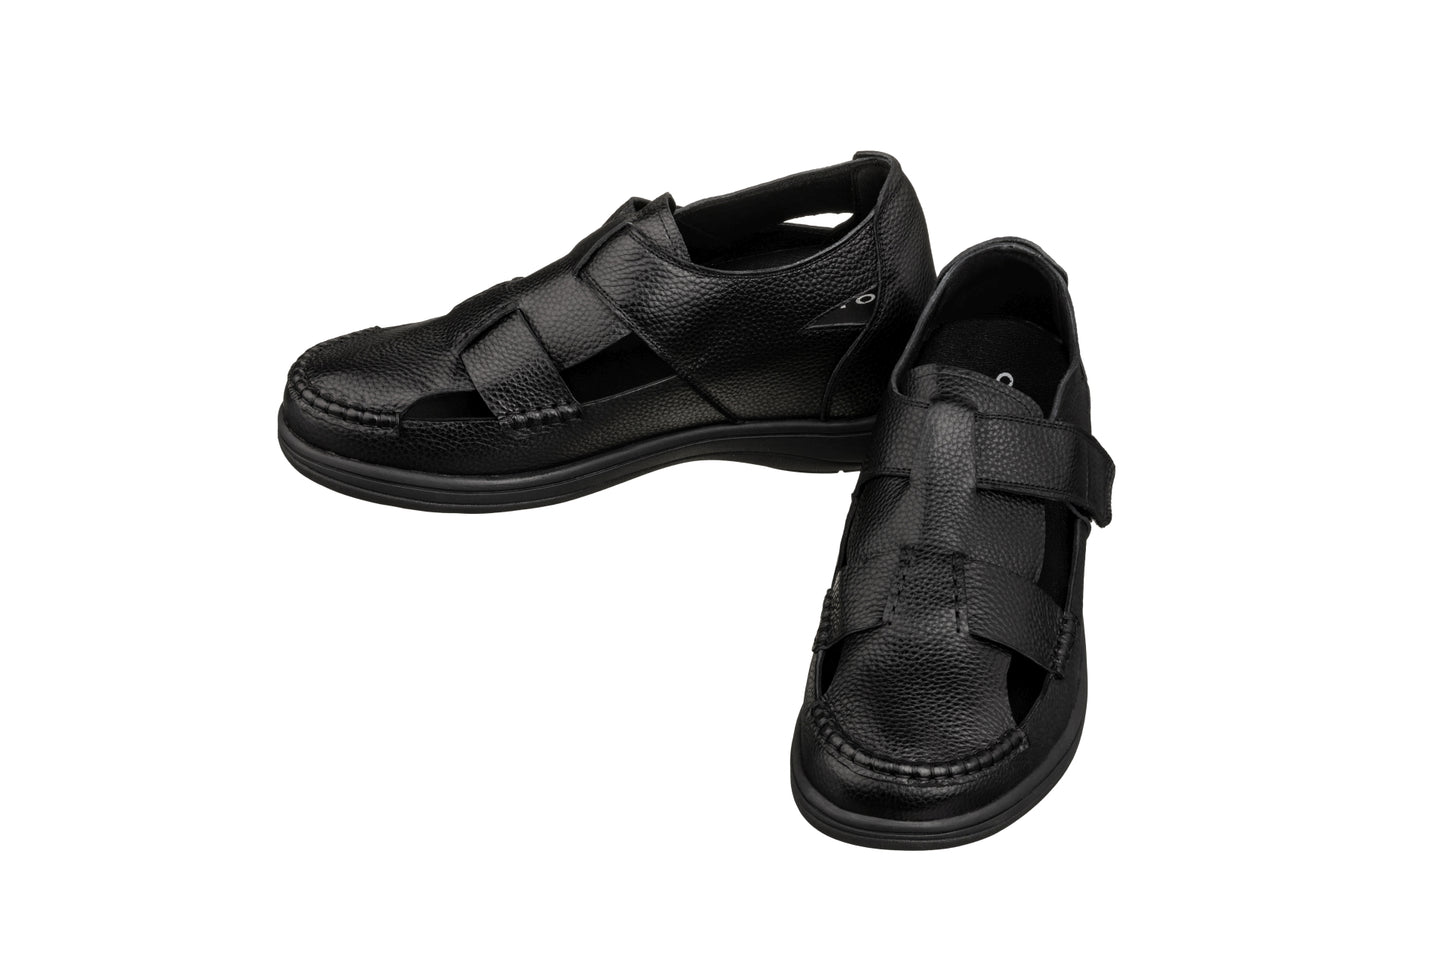 Elevator shoes height increase CALTO - K2661 - 3.2 Inches Taller (Black) - Casual Fisherman Sandal